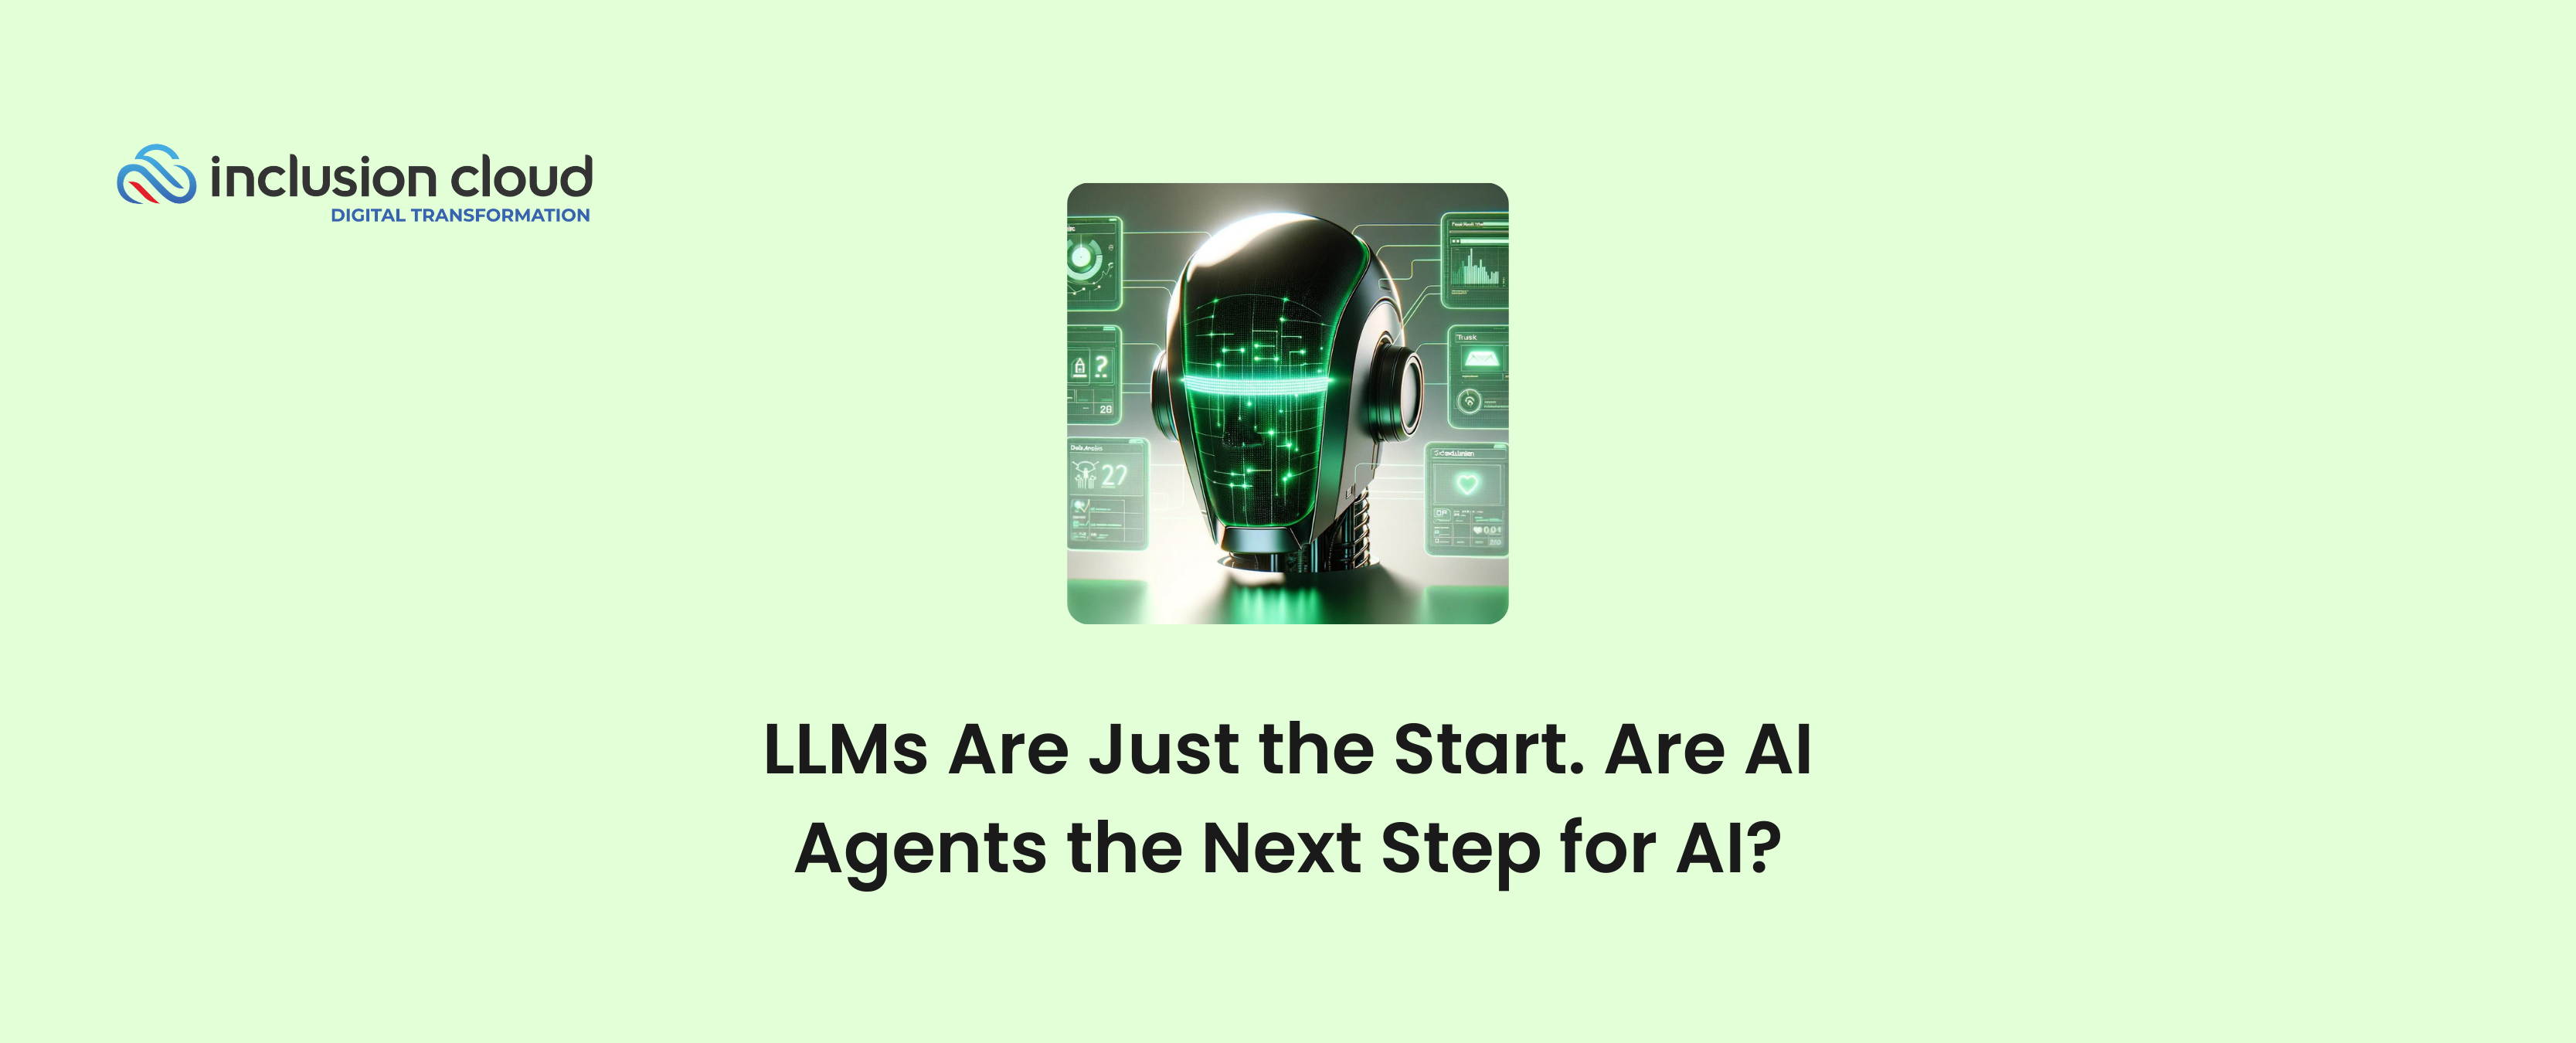 LLMs Are Just the Start. Are AI Agents the Next Step for AI